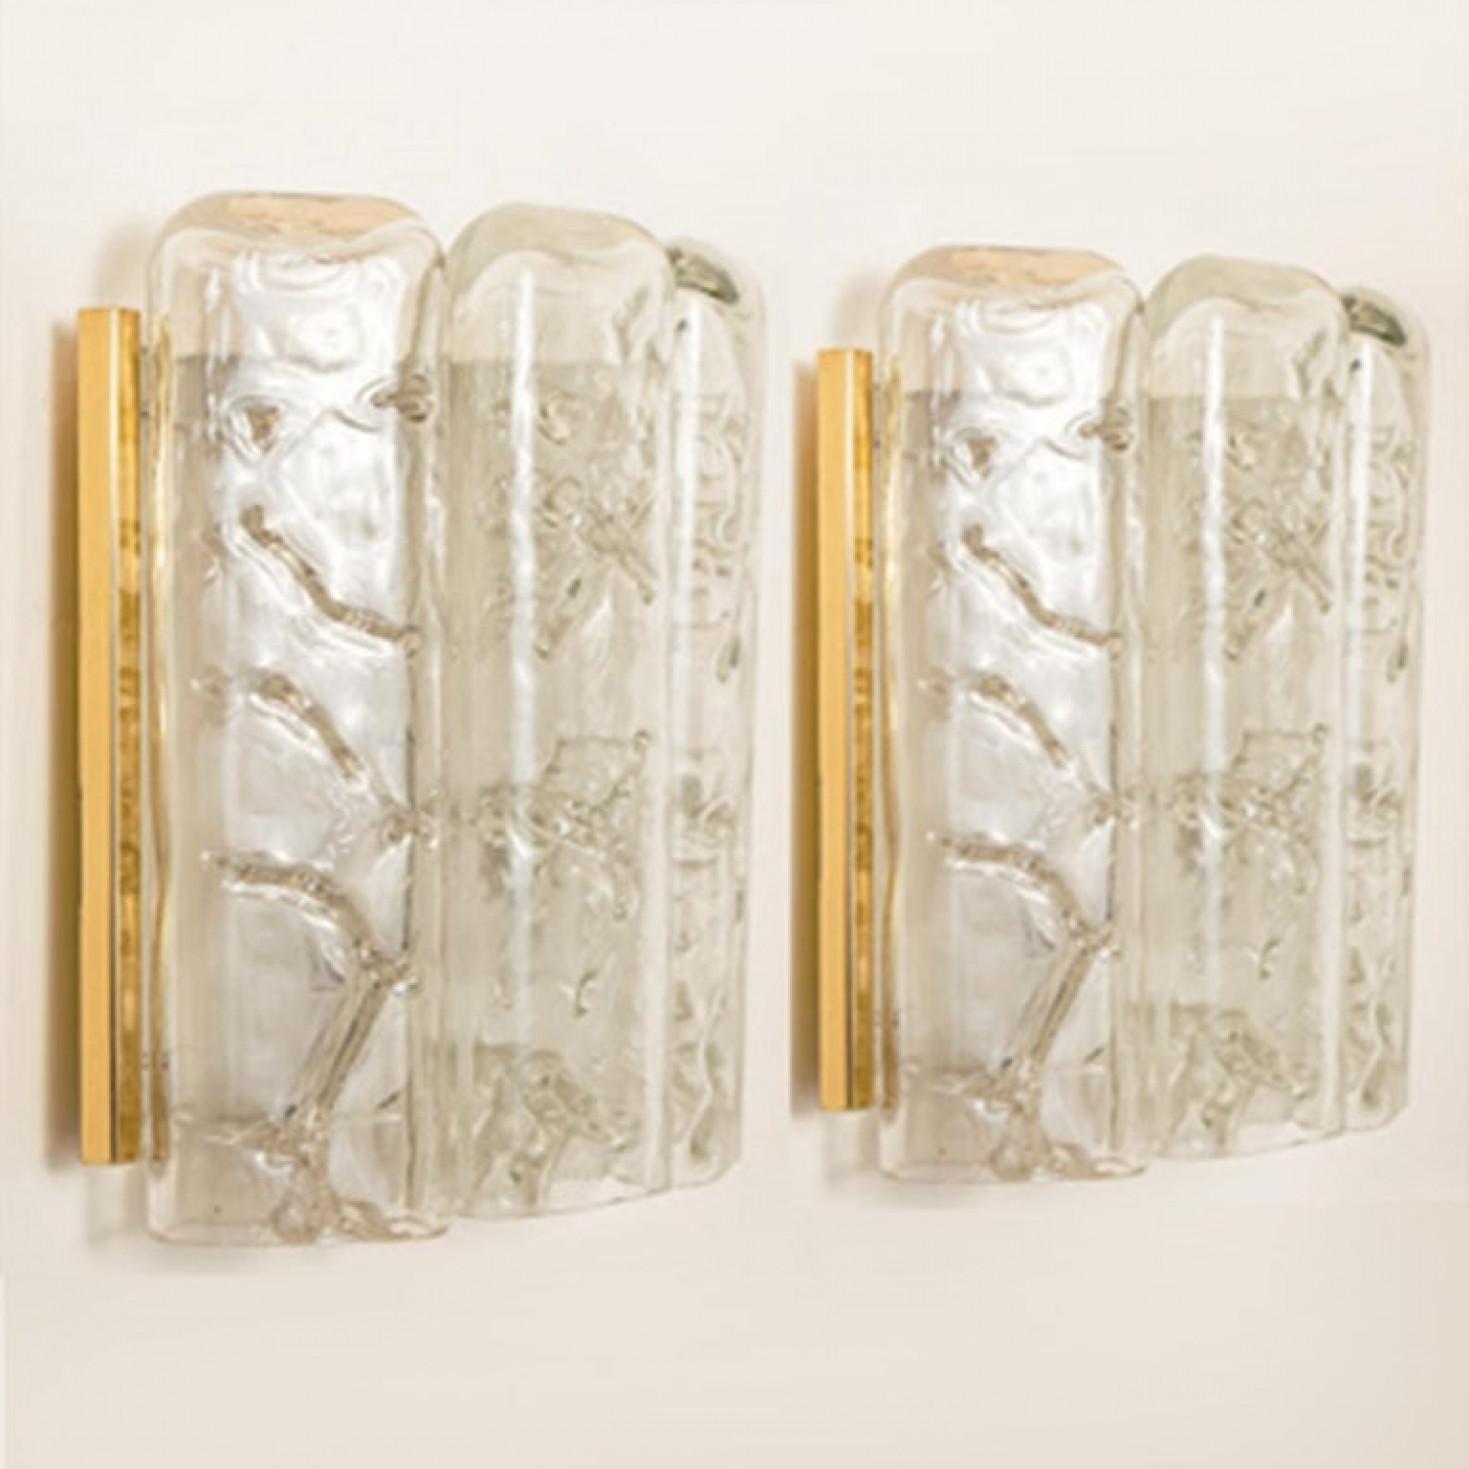 Large Quanty of Structured Blown Glass and Brass Wall Sconces by Doria, 1960 For Sale 5